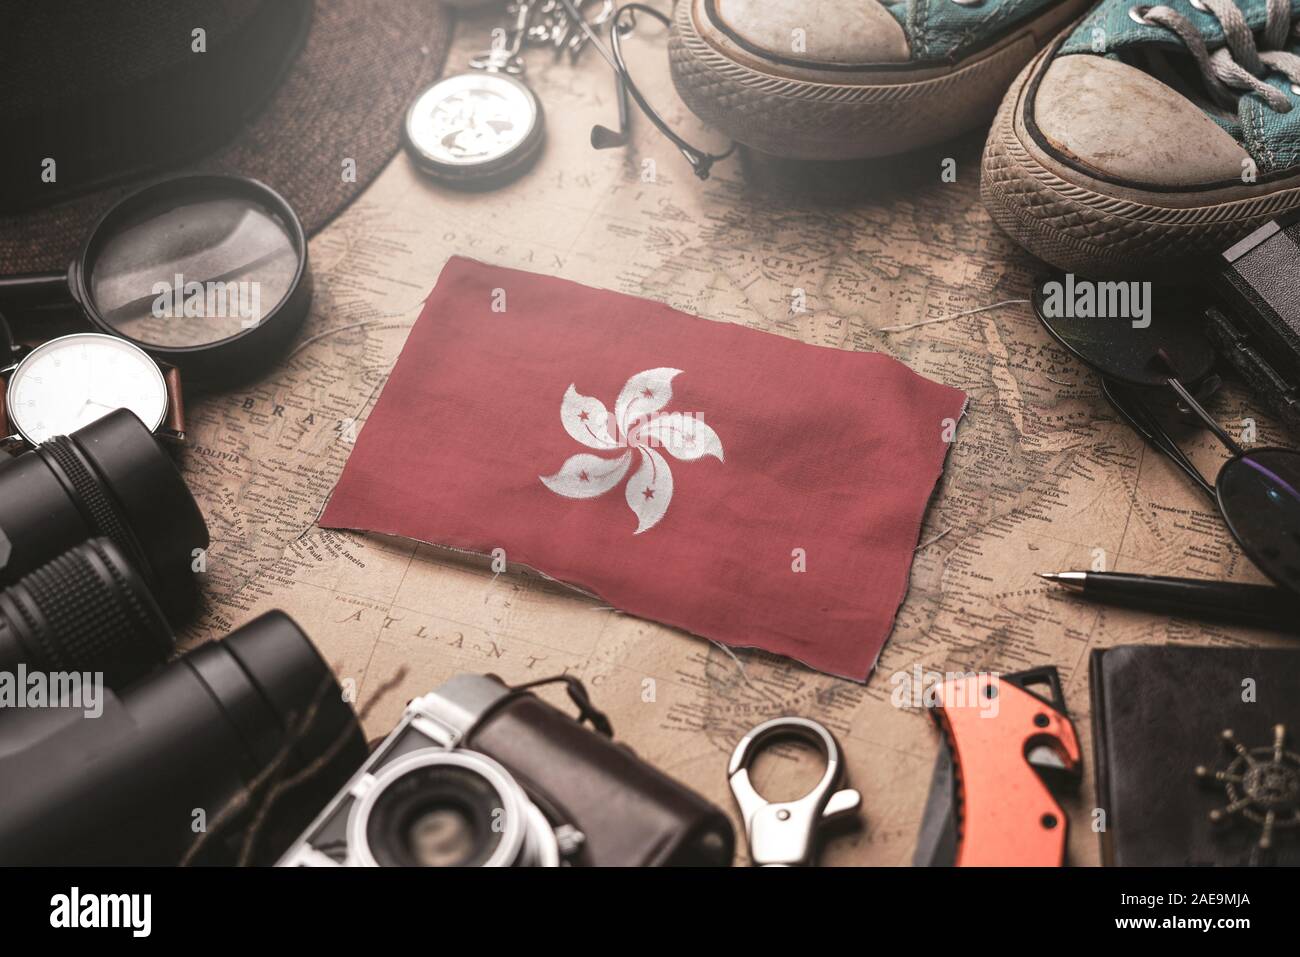 Hong Kong Flag Between Traveler's Accessories on Old Vintage Map. Tourist Destination Concept. Stock Photo